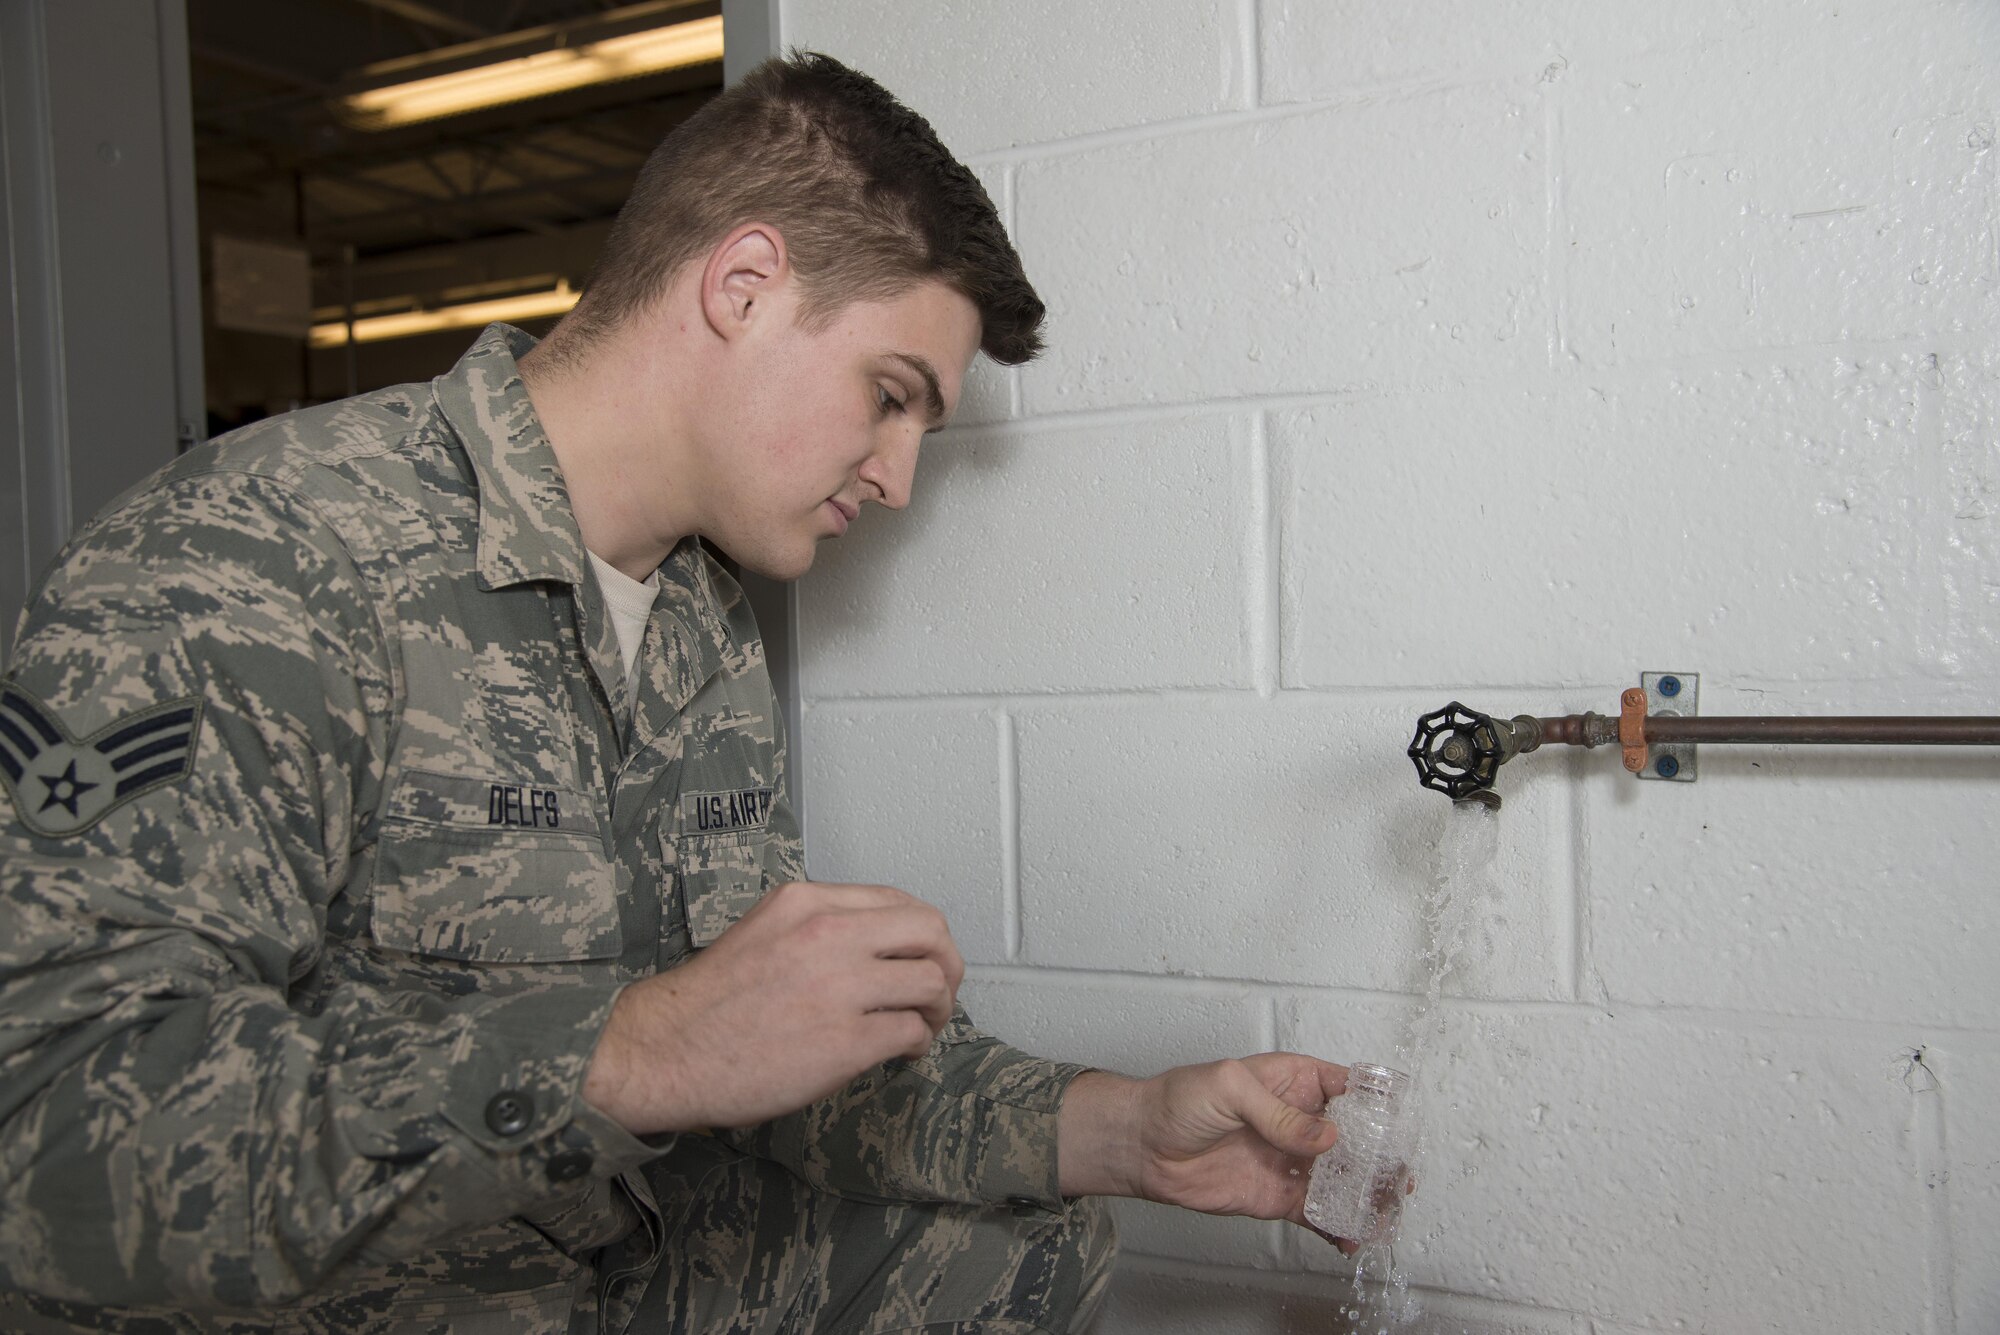 Senior Airman Alexander Delfs, 436th Aerospace Medical Squadron bioenvironmental engineering journeyman, collects a water sample for bacteriologic testing Nov. 16, 2016, at an aircraft watering point on Dover Air Force Base, Del. Members of the 436th AMDS bioenvironmental engineering flight send water samples to a laboratory to test for the presence of harmful bacteria in drinking water. (U.S. Air Force photo by Senior Airman Aaron J. Jenne)